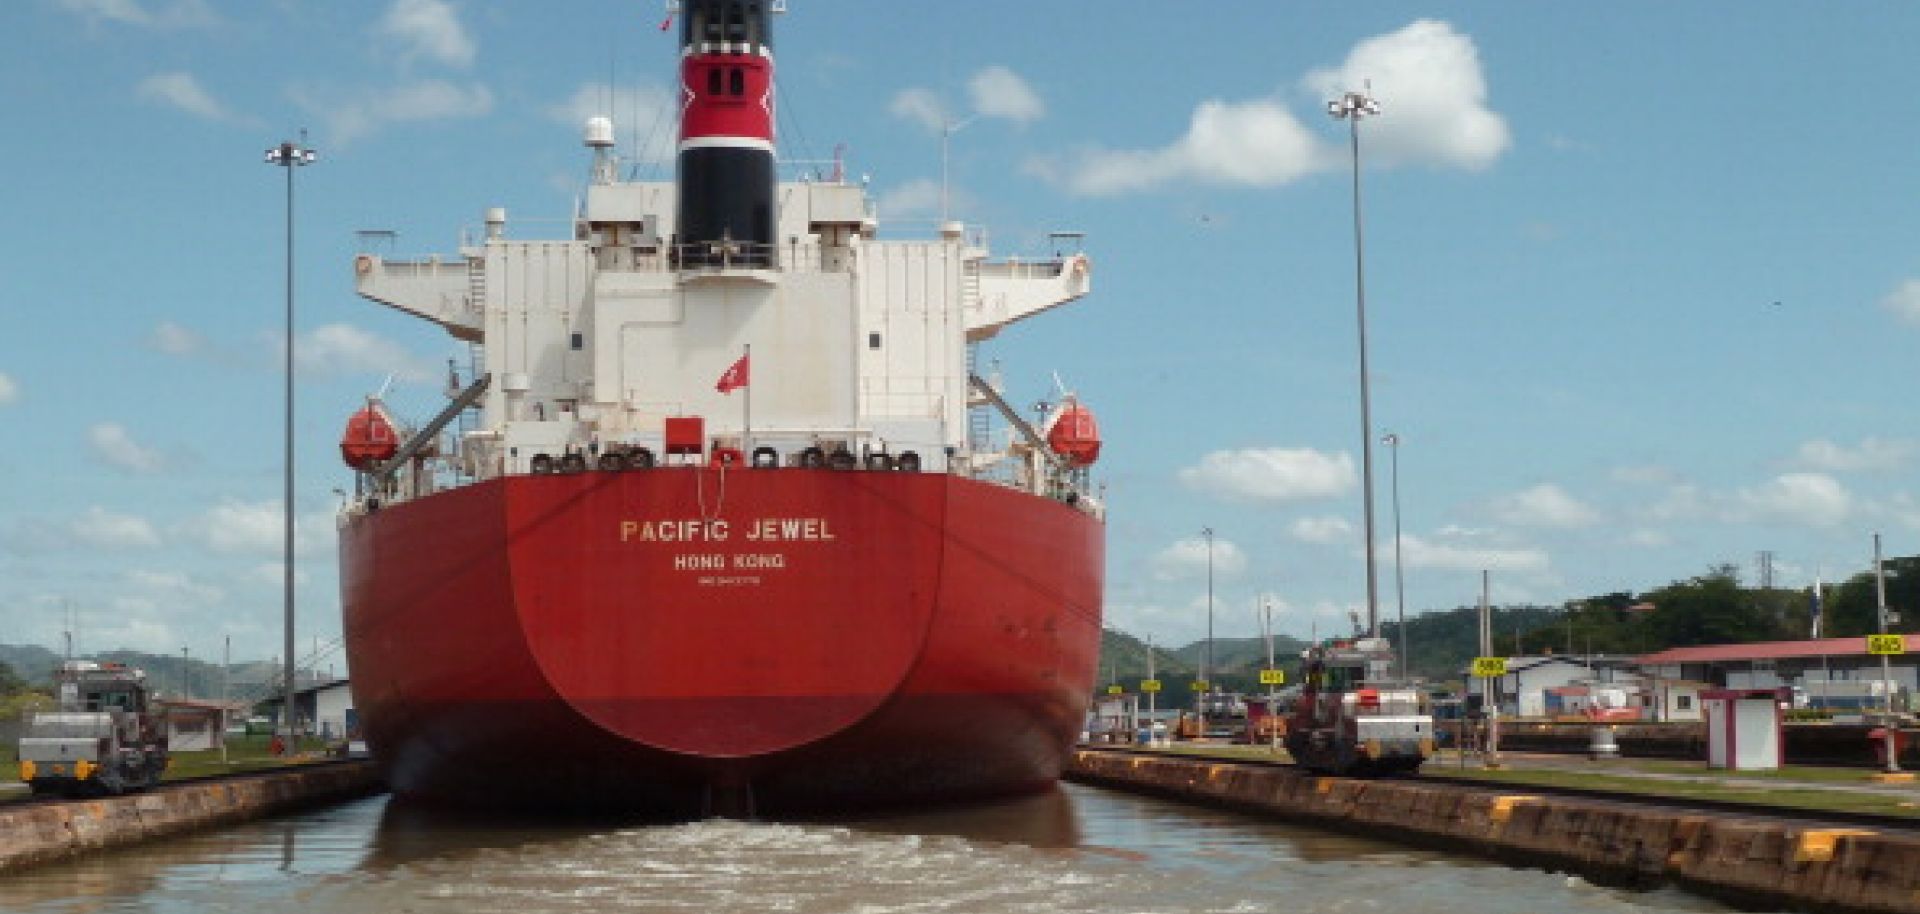 The Panama Canal's Expansion: New Options for Trade